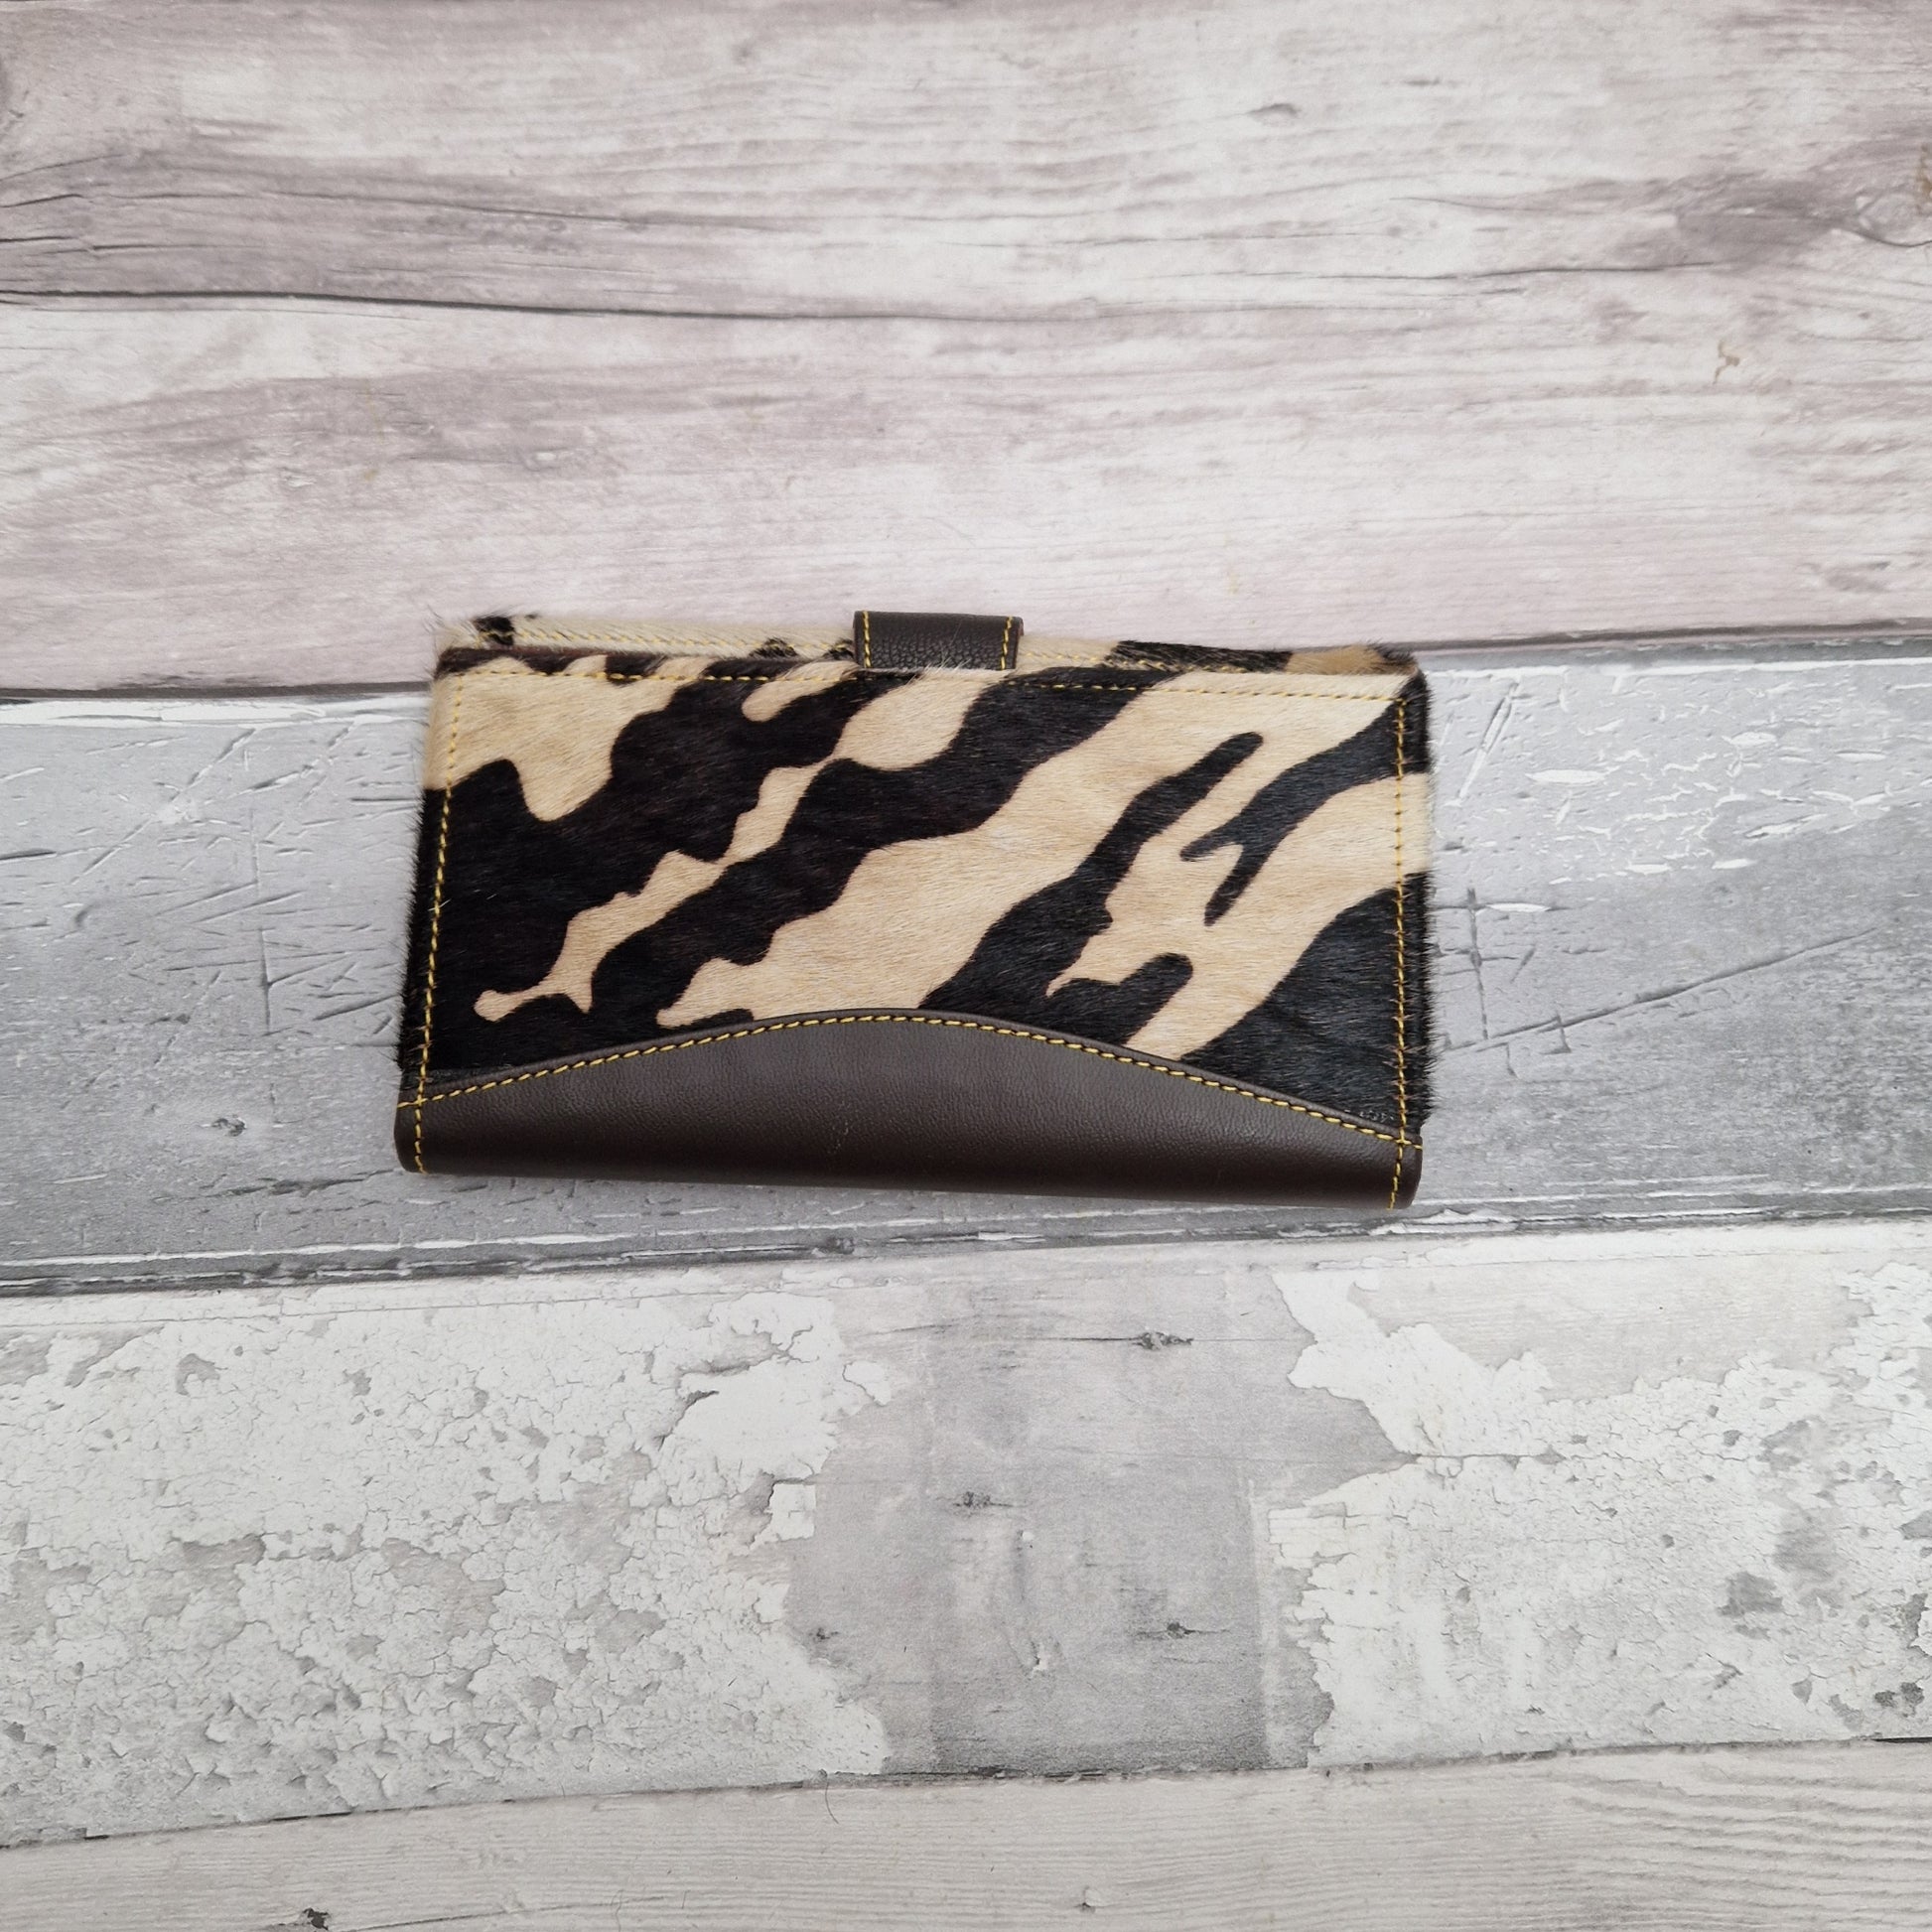 Purse made from leather off cuts featuring textured panels in a cow print.